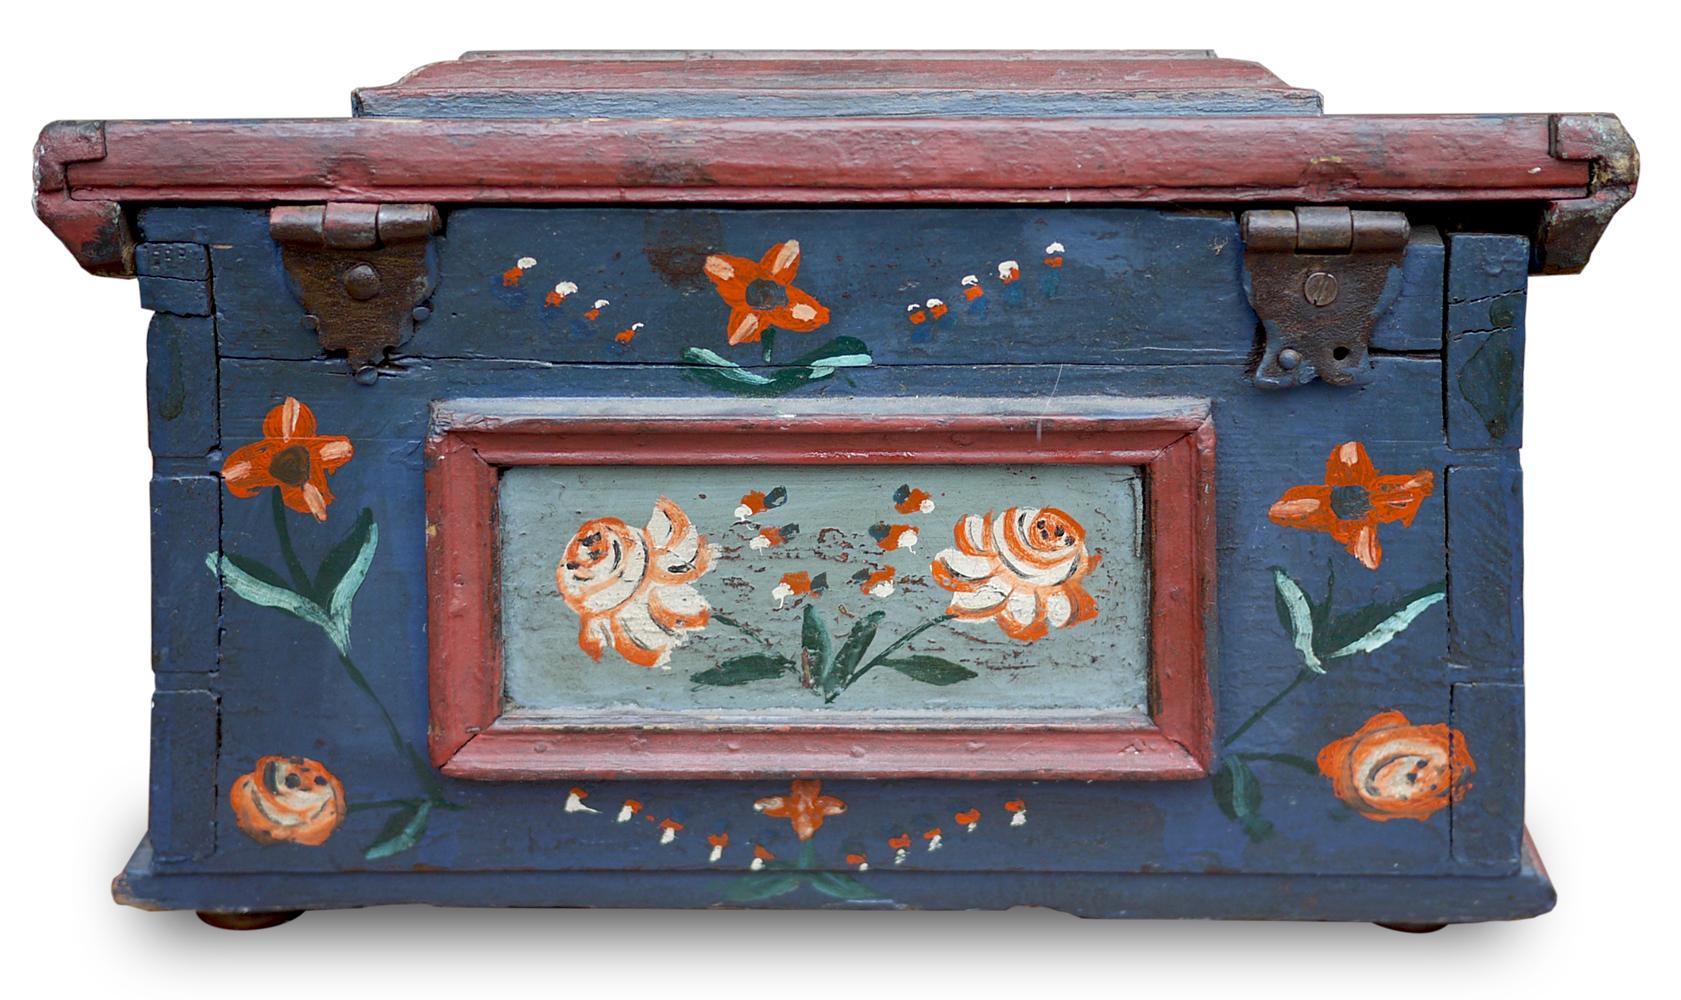 Fir Exceptional European Painted Jewelry Sewing Box, 18th Century